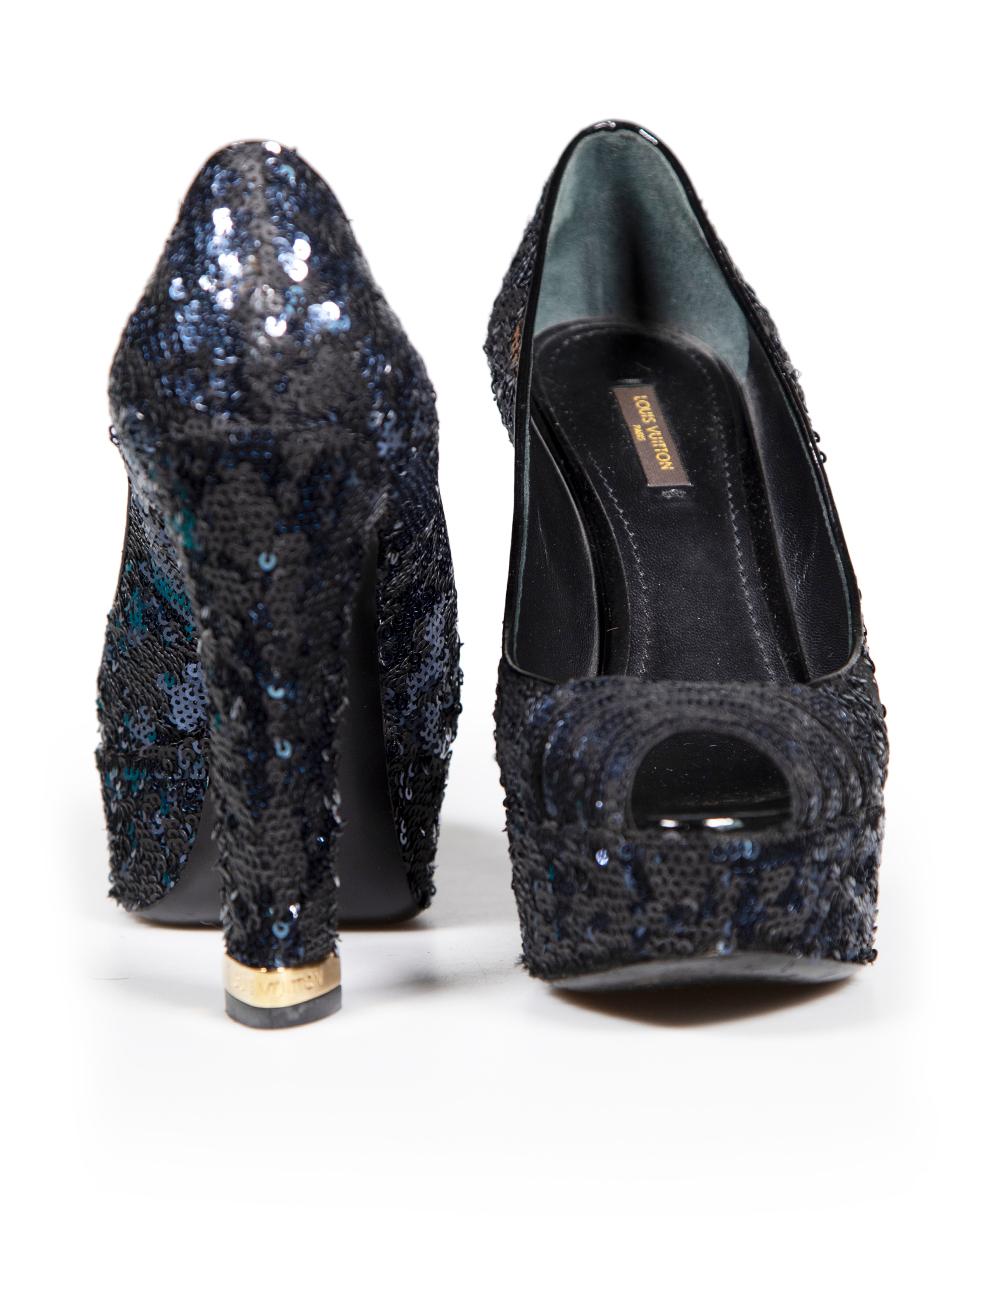 Louis Vuitton Navy Sequin Peep Toe Platform Heels Size IT 38.5 In Good Condition For Sale In London, GB